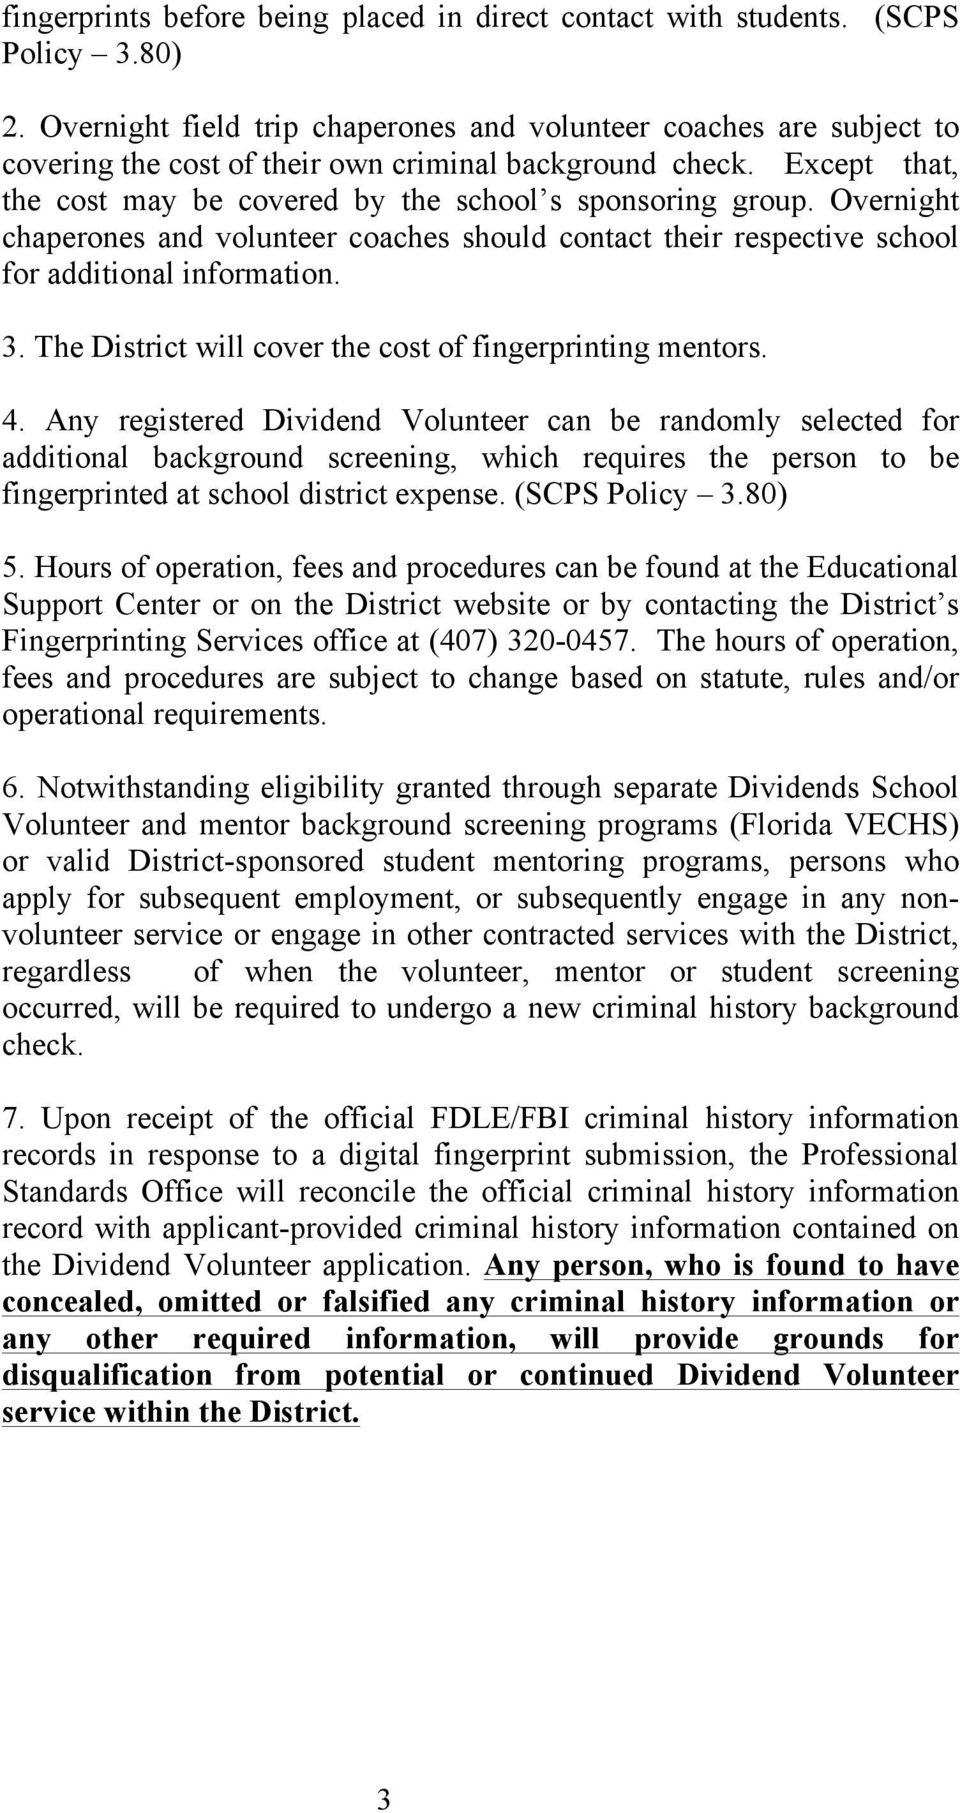 Overnight chaperones and volunteer coaches should contact their respective school for additional information. 3. The District will cover the cost of fingerprinting mentors. 4.